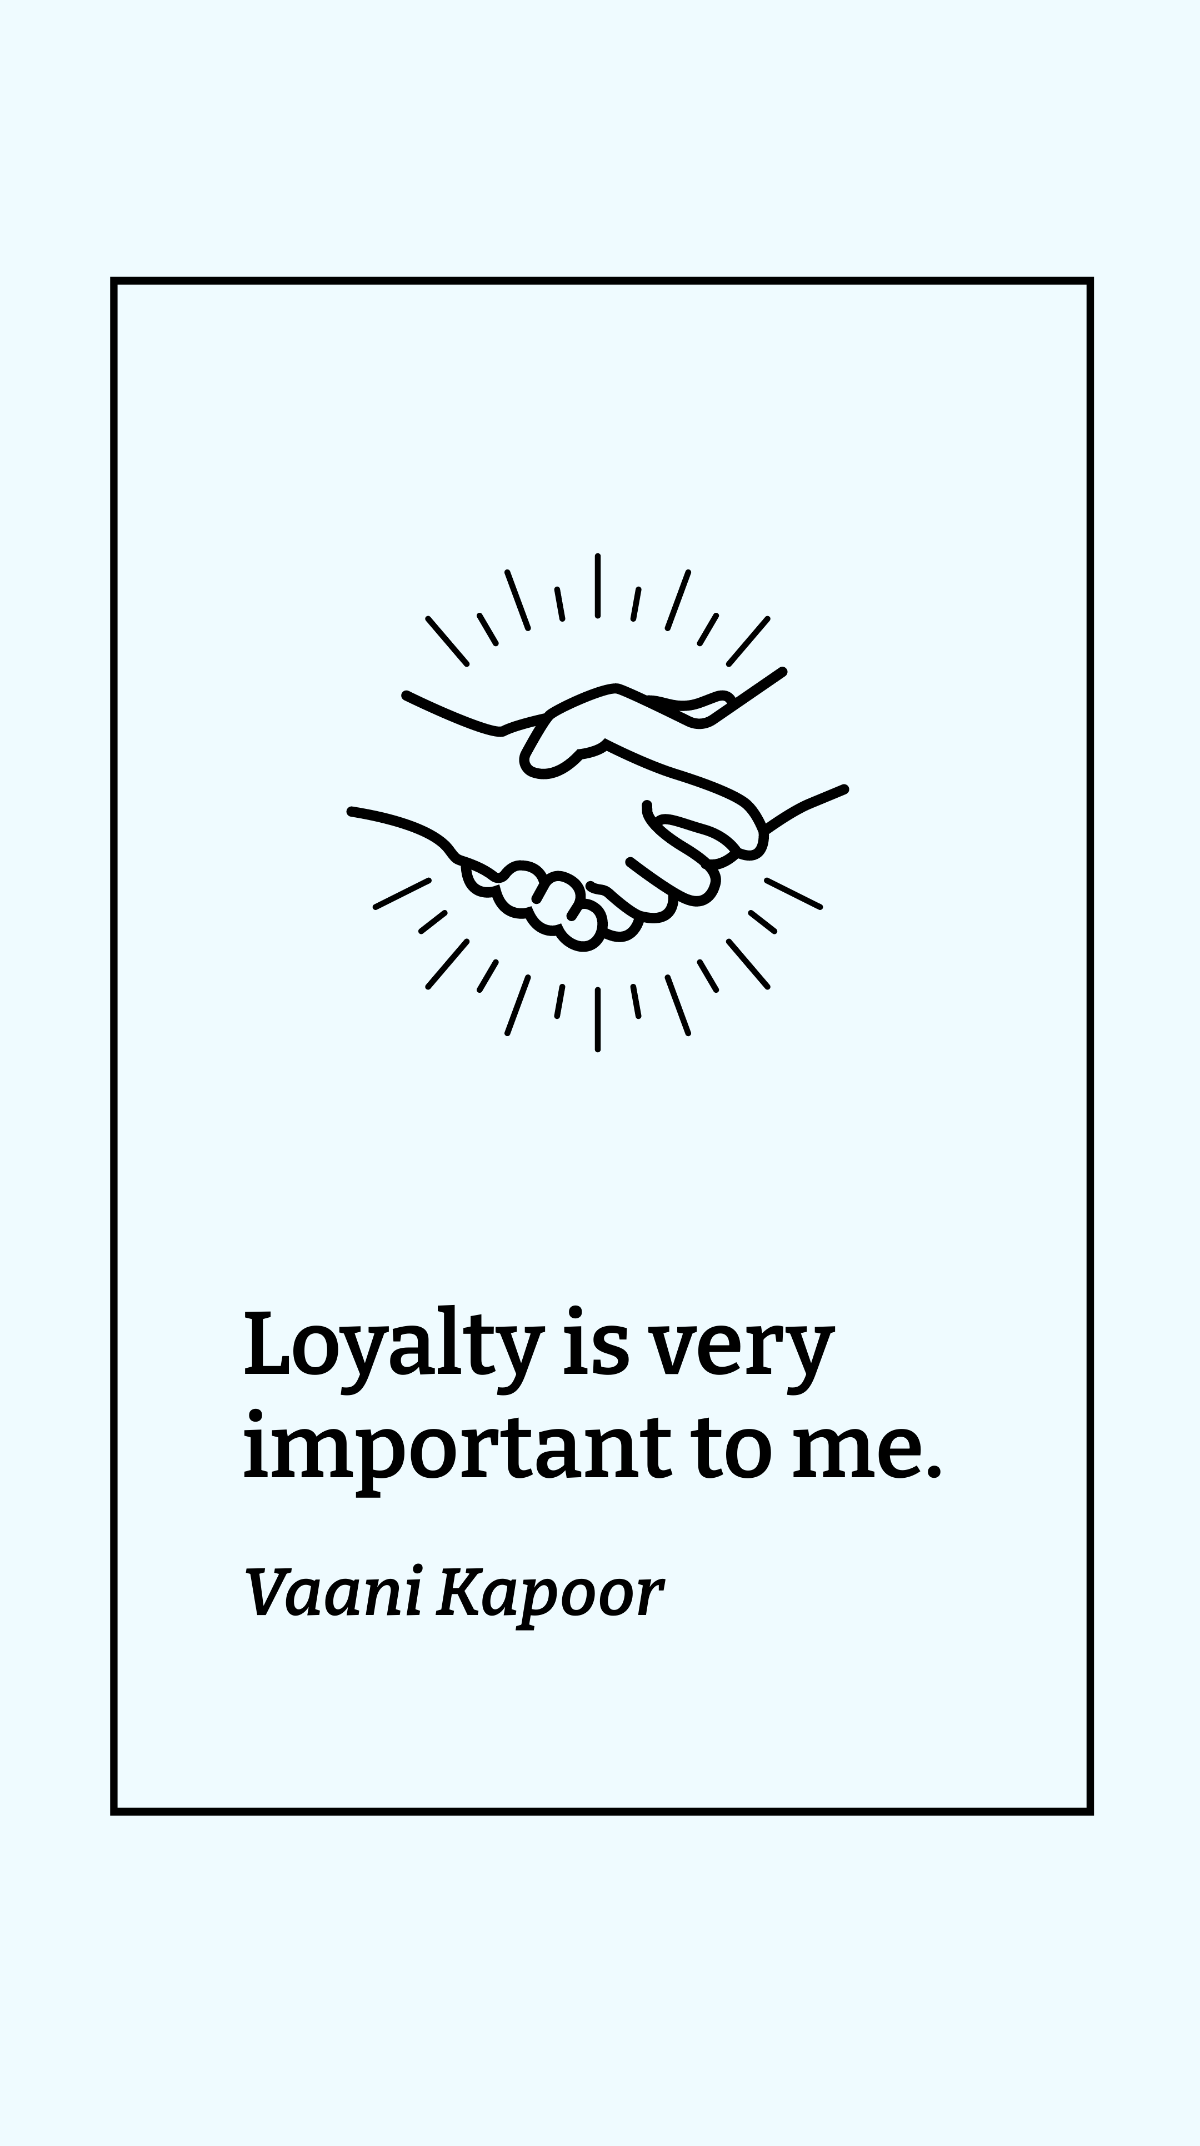 Free Vaani Kapoor - Loyalty is very important to me. Template